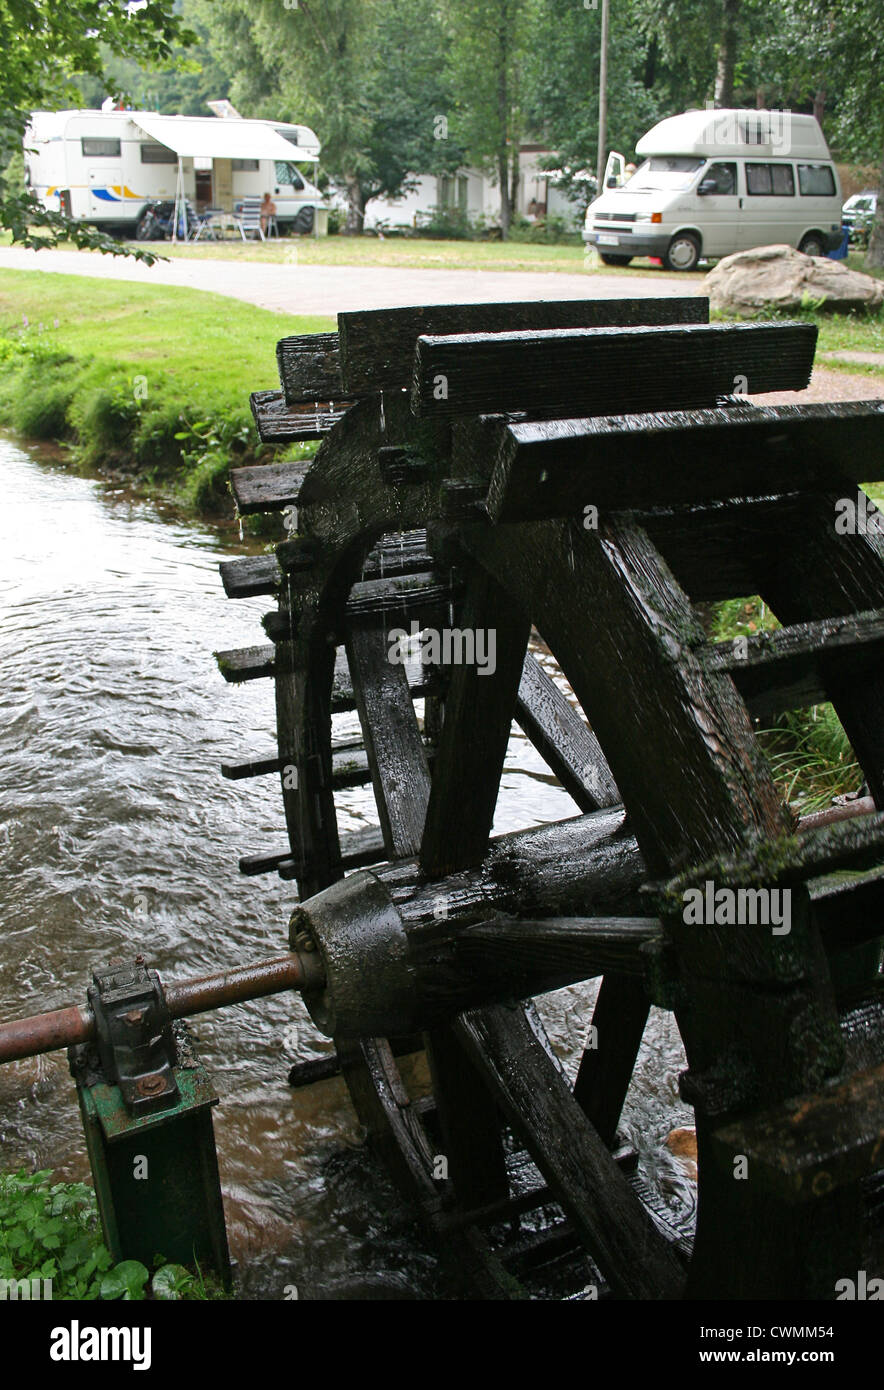 The waterwheel at Camping Clausensee, Clausen Lake, Waldfischbach-Burgalben, Palatinate Forest, Rhine Valley, Germany Stock Photo